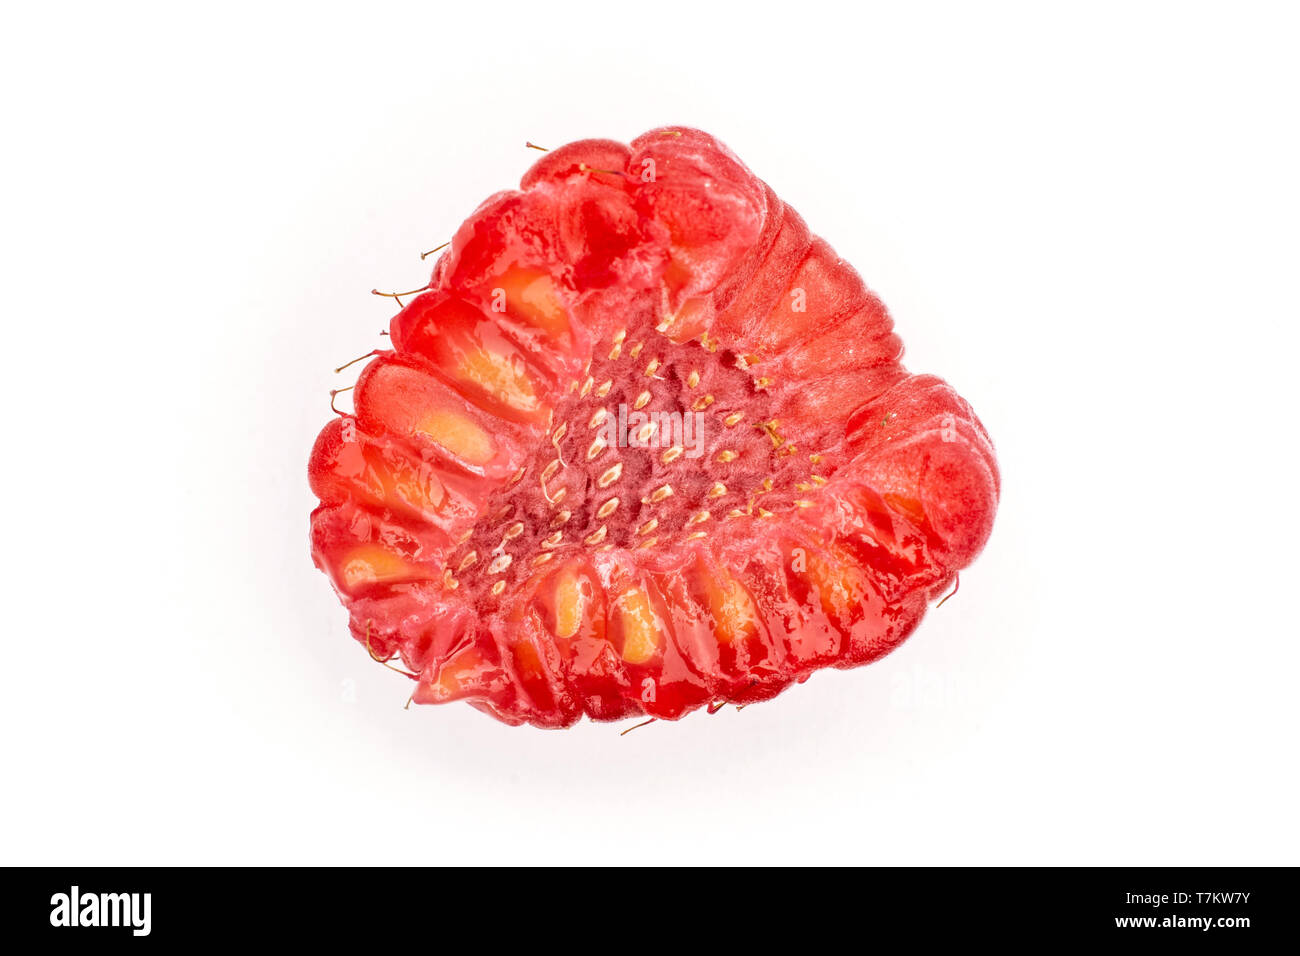 One half of fresh red raspberry cross section flatlay isolated on white background Stock Photo